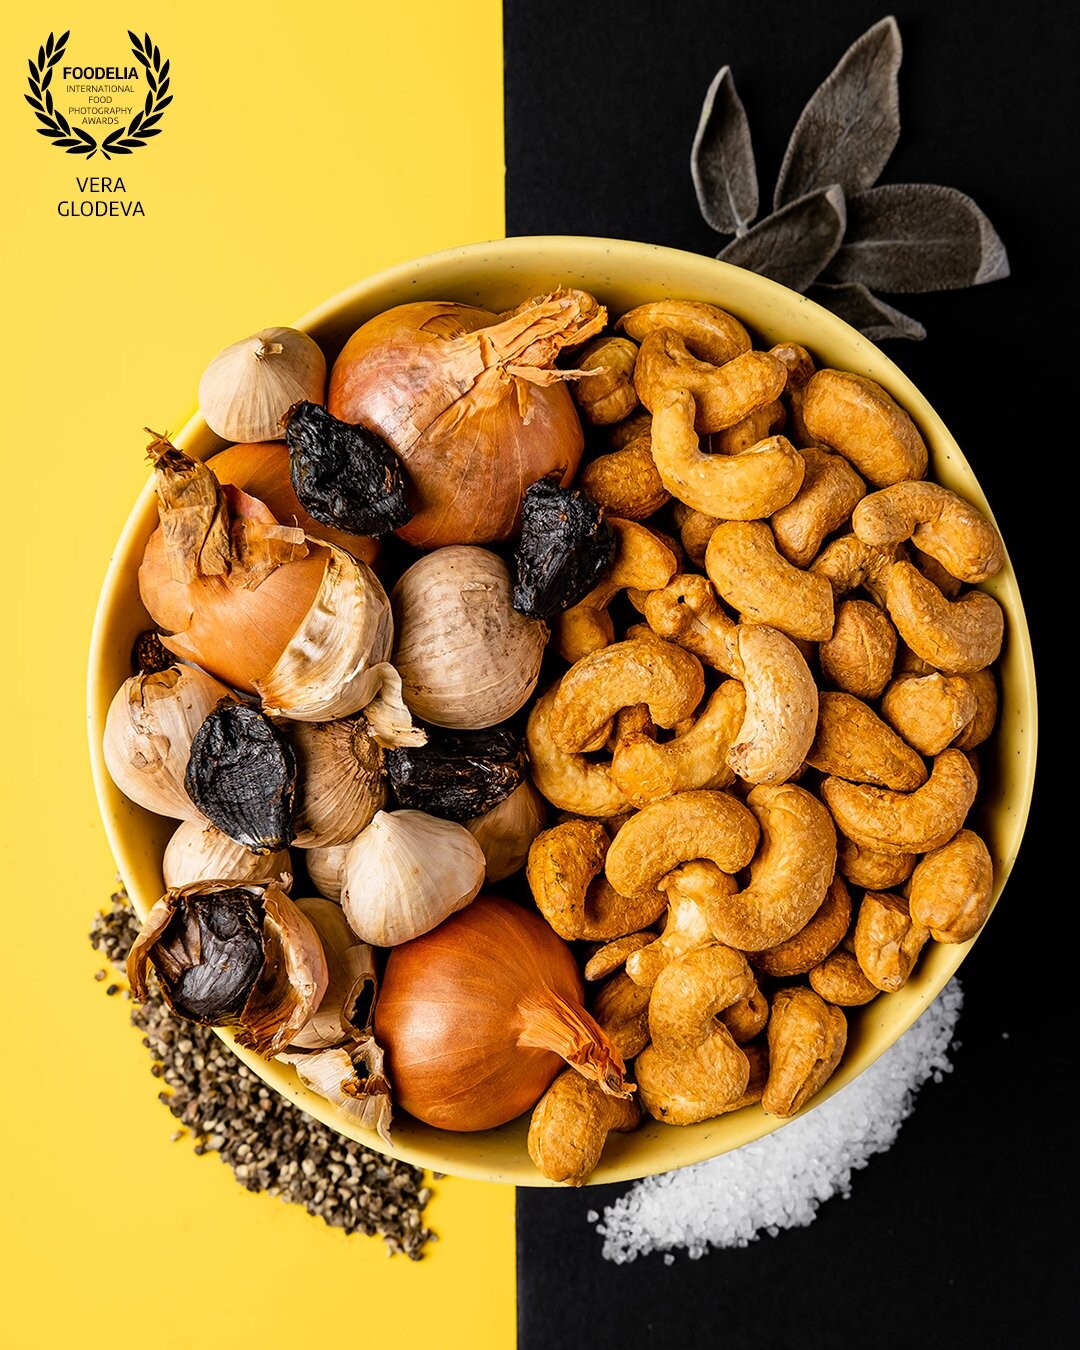 I wanted to show on the picture the flavor combinations of cashews in geometry. And the two colors black and yellow are the two main colors of the brand.